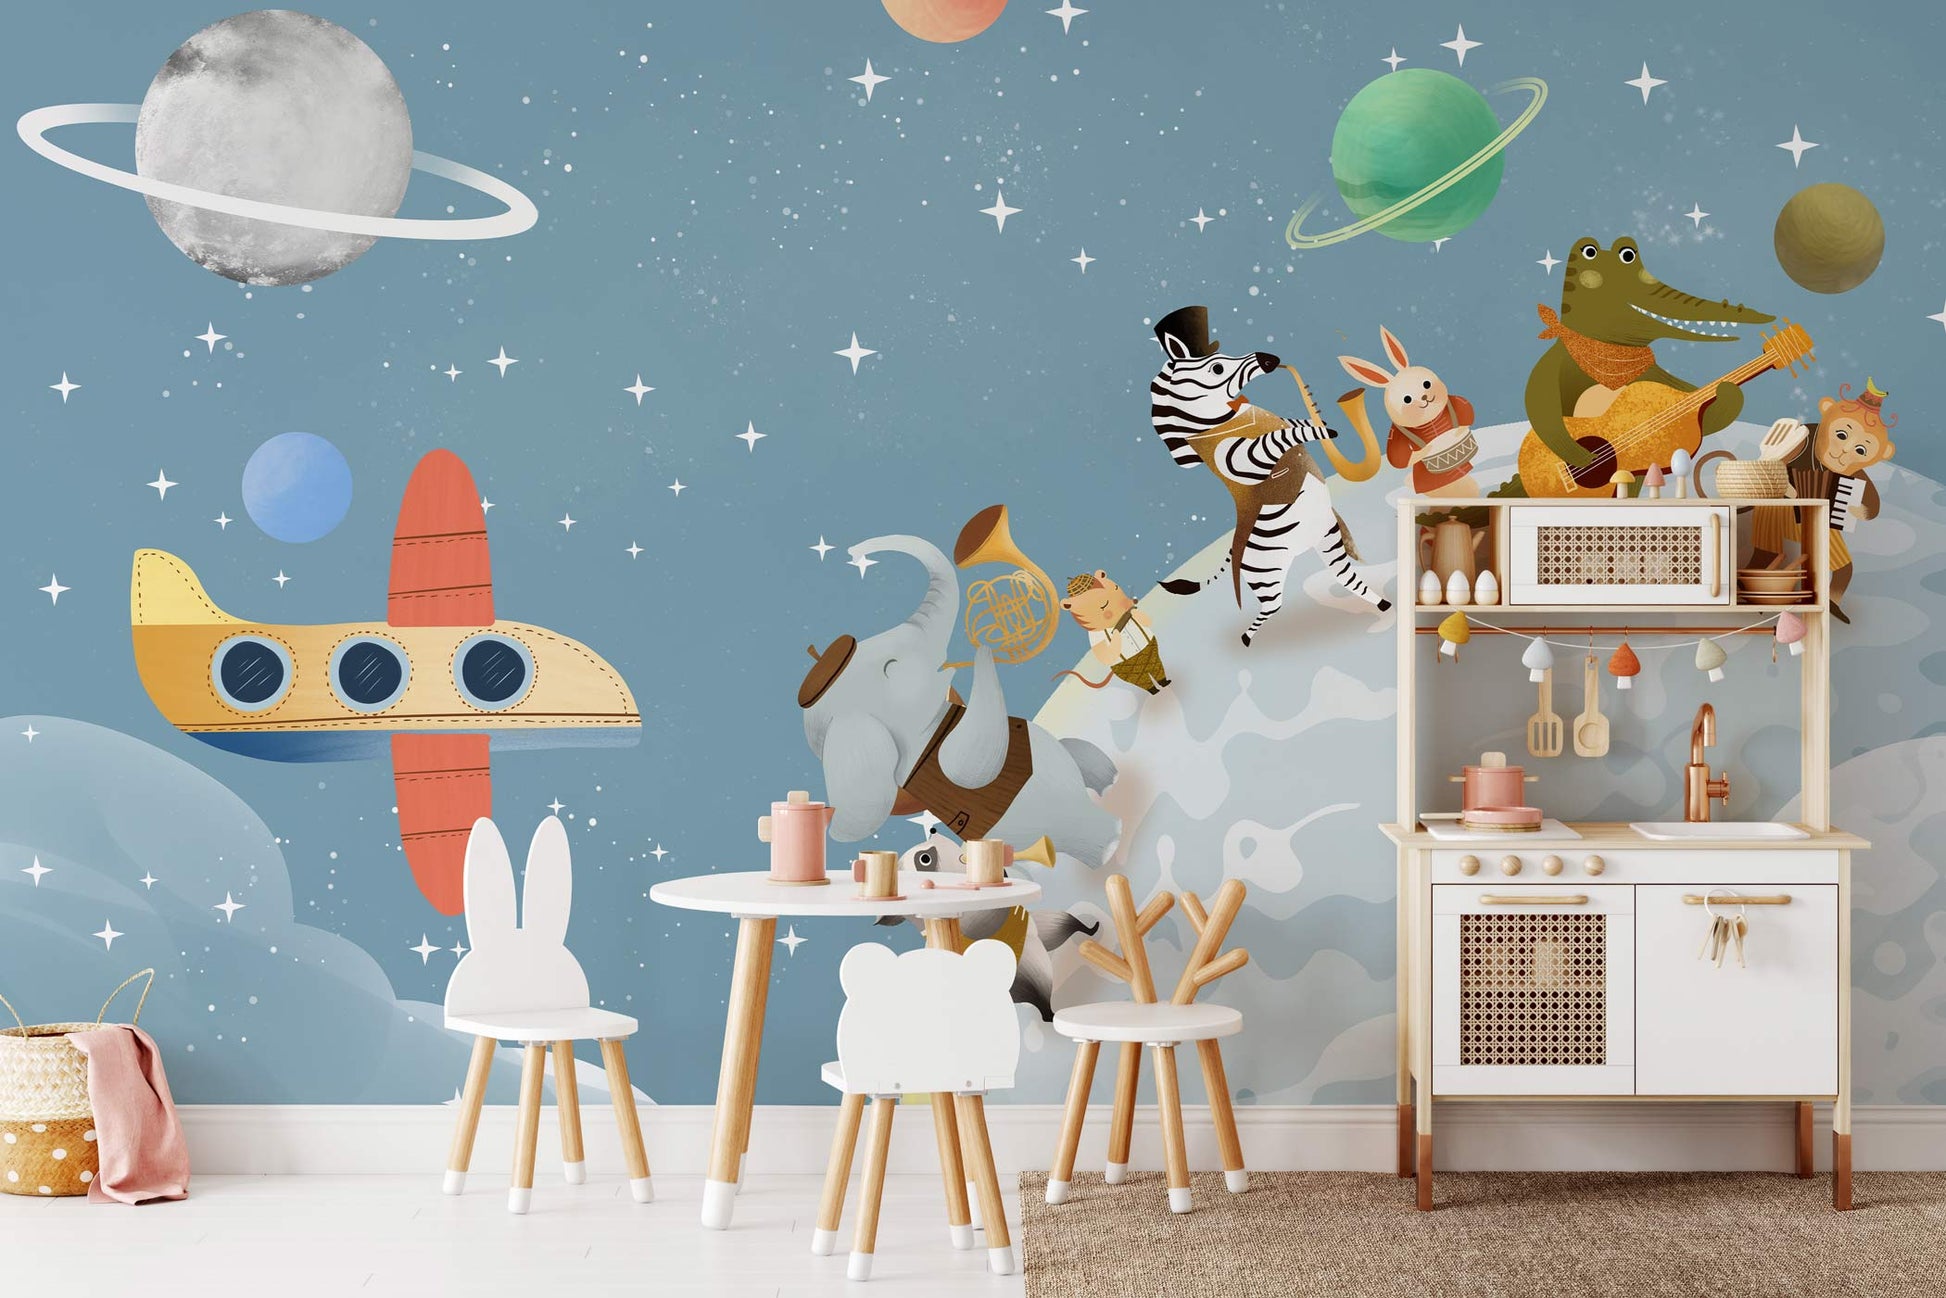 Wallpaper mural featuring roaming animals from the universe affixed on the wall in the nursery.